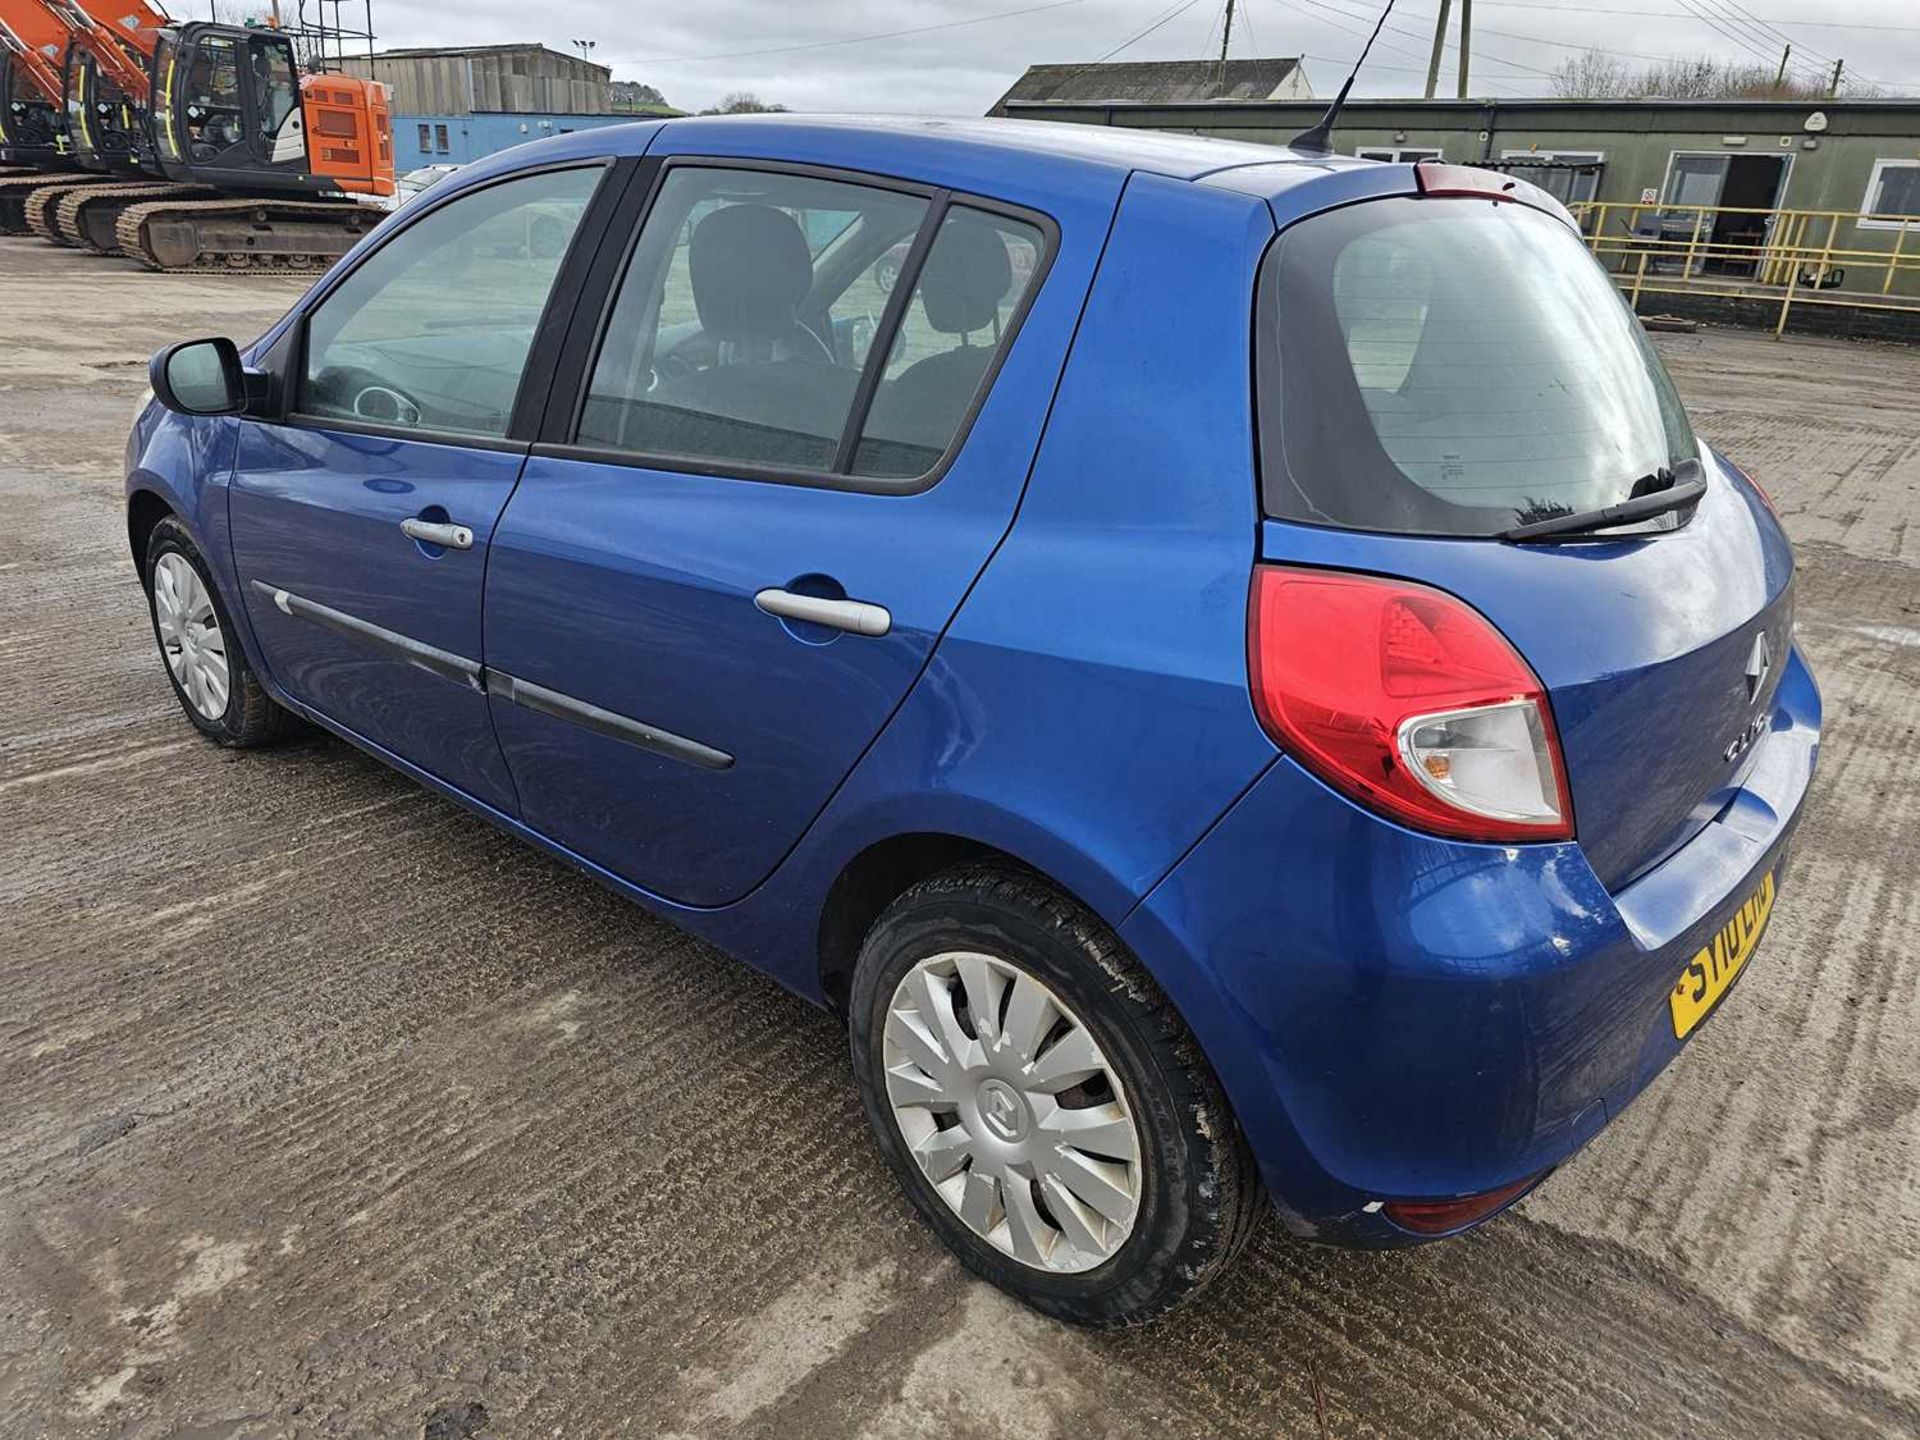 2010 Renault Clio Auto, A/C (Reg. Docs. Available, Tested 01/25) - Image 6 of 28